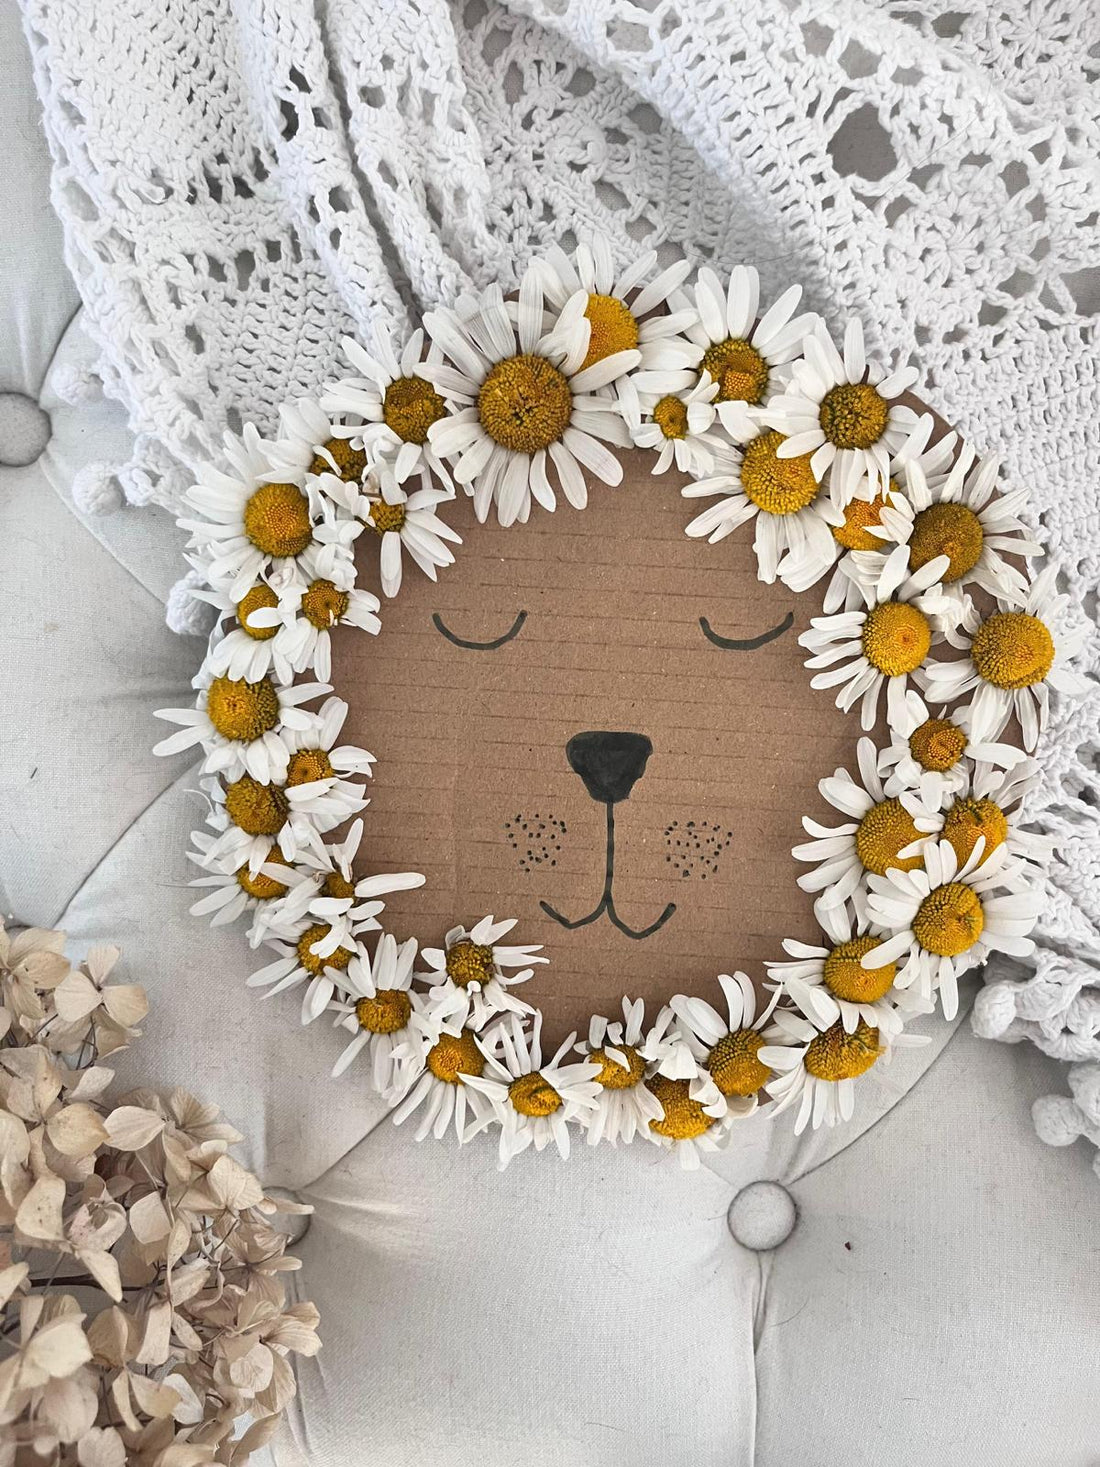 A Delightful Summer Adventure: Forget Daisy Chains its Daisy Manes!